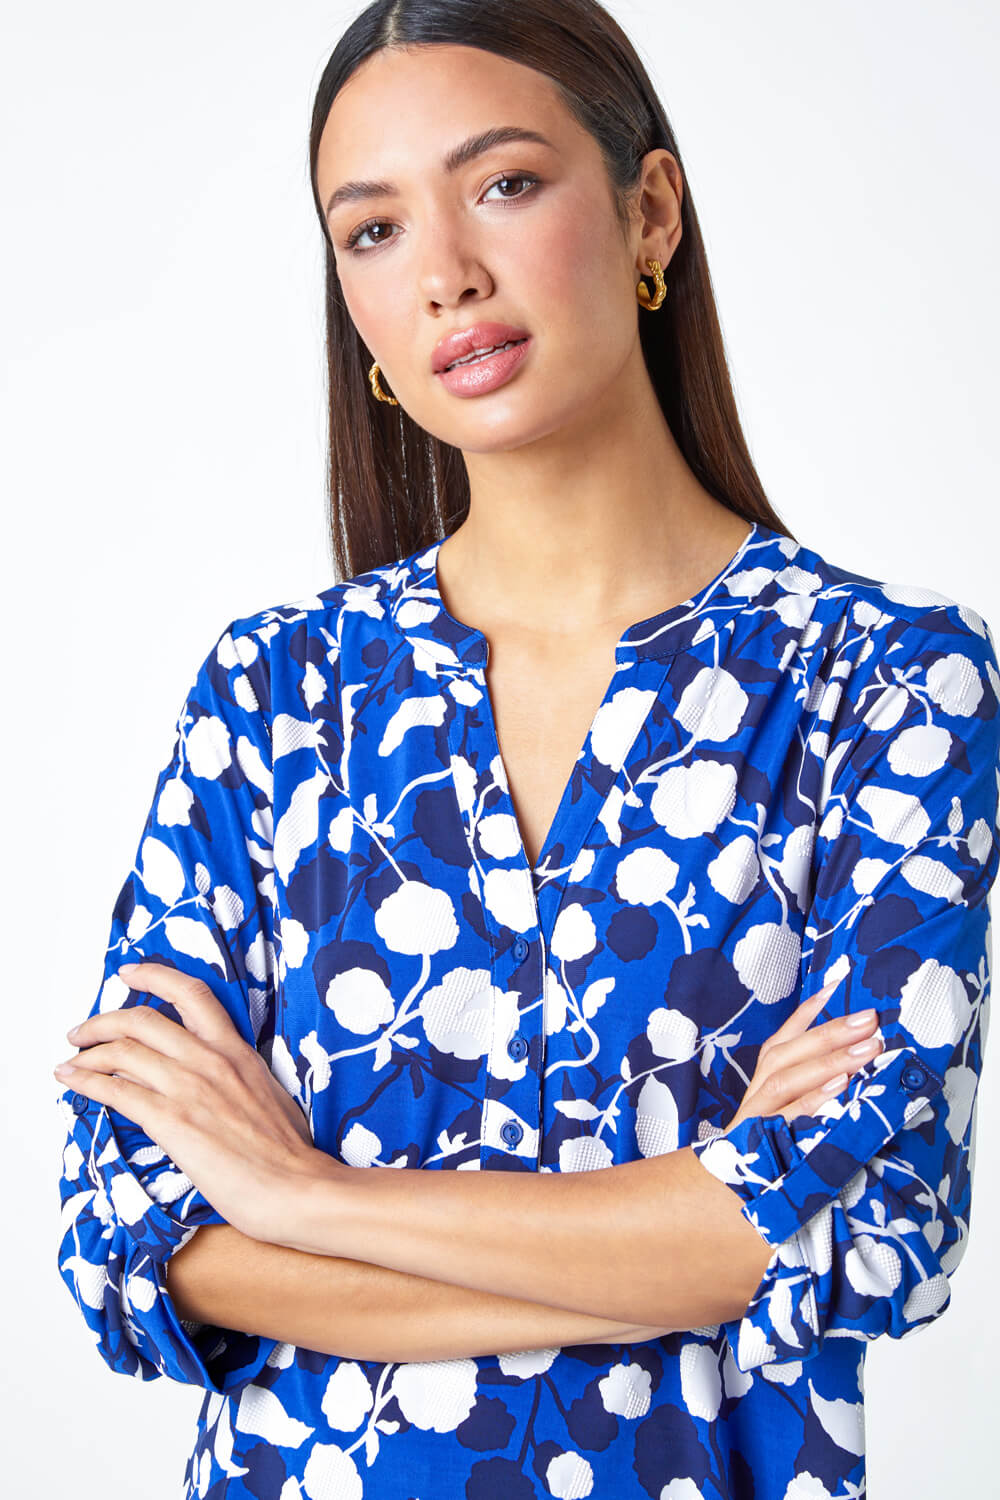 Royal Blue Textured Floral Print Stretch Shirt, Image 4 of 5